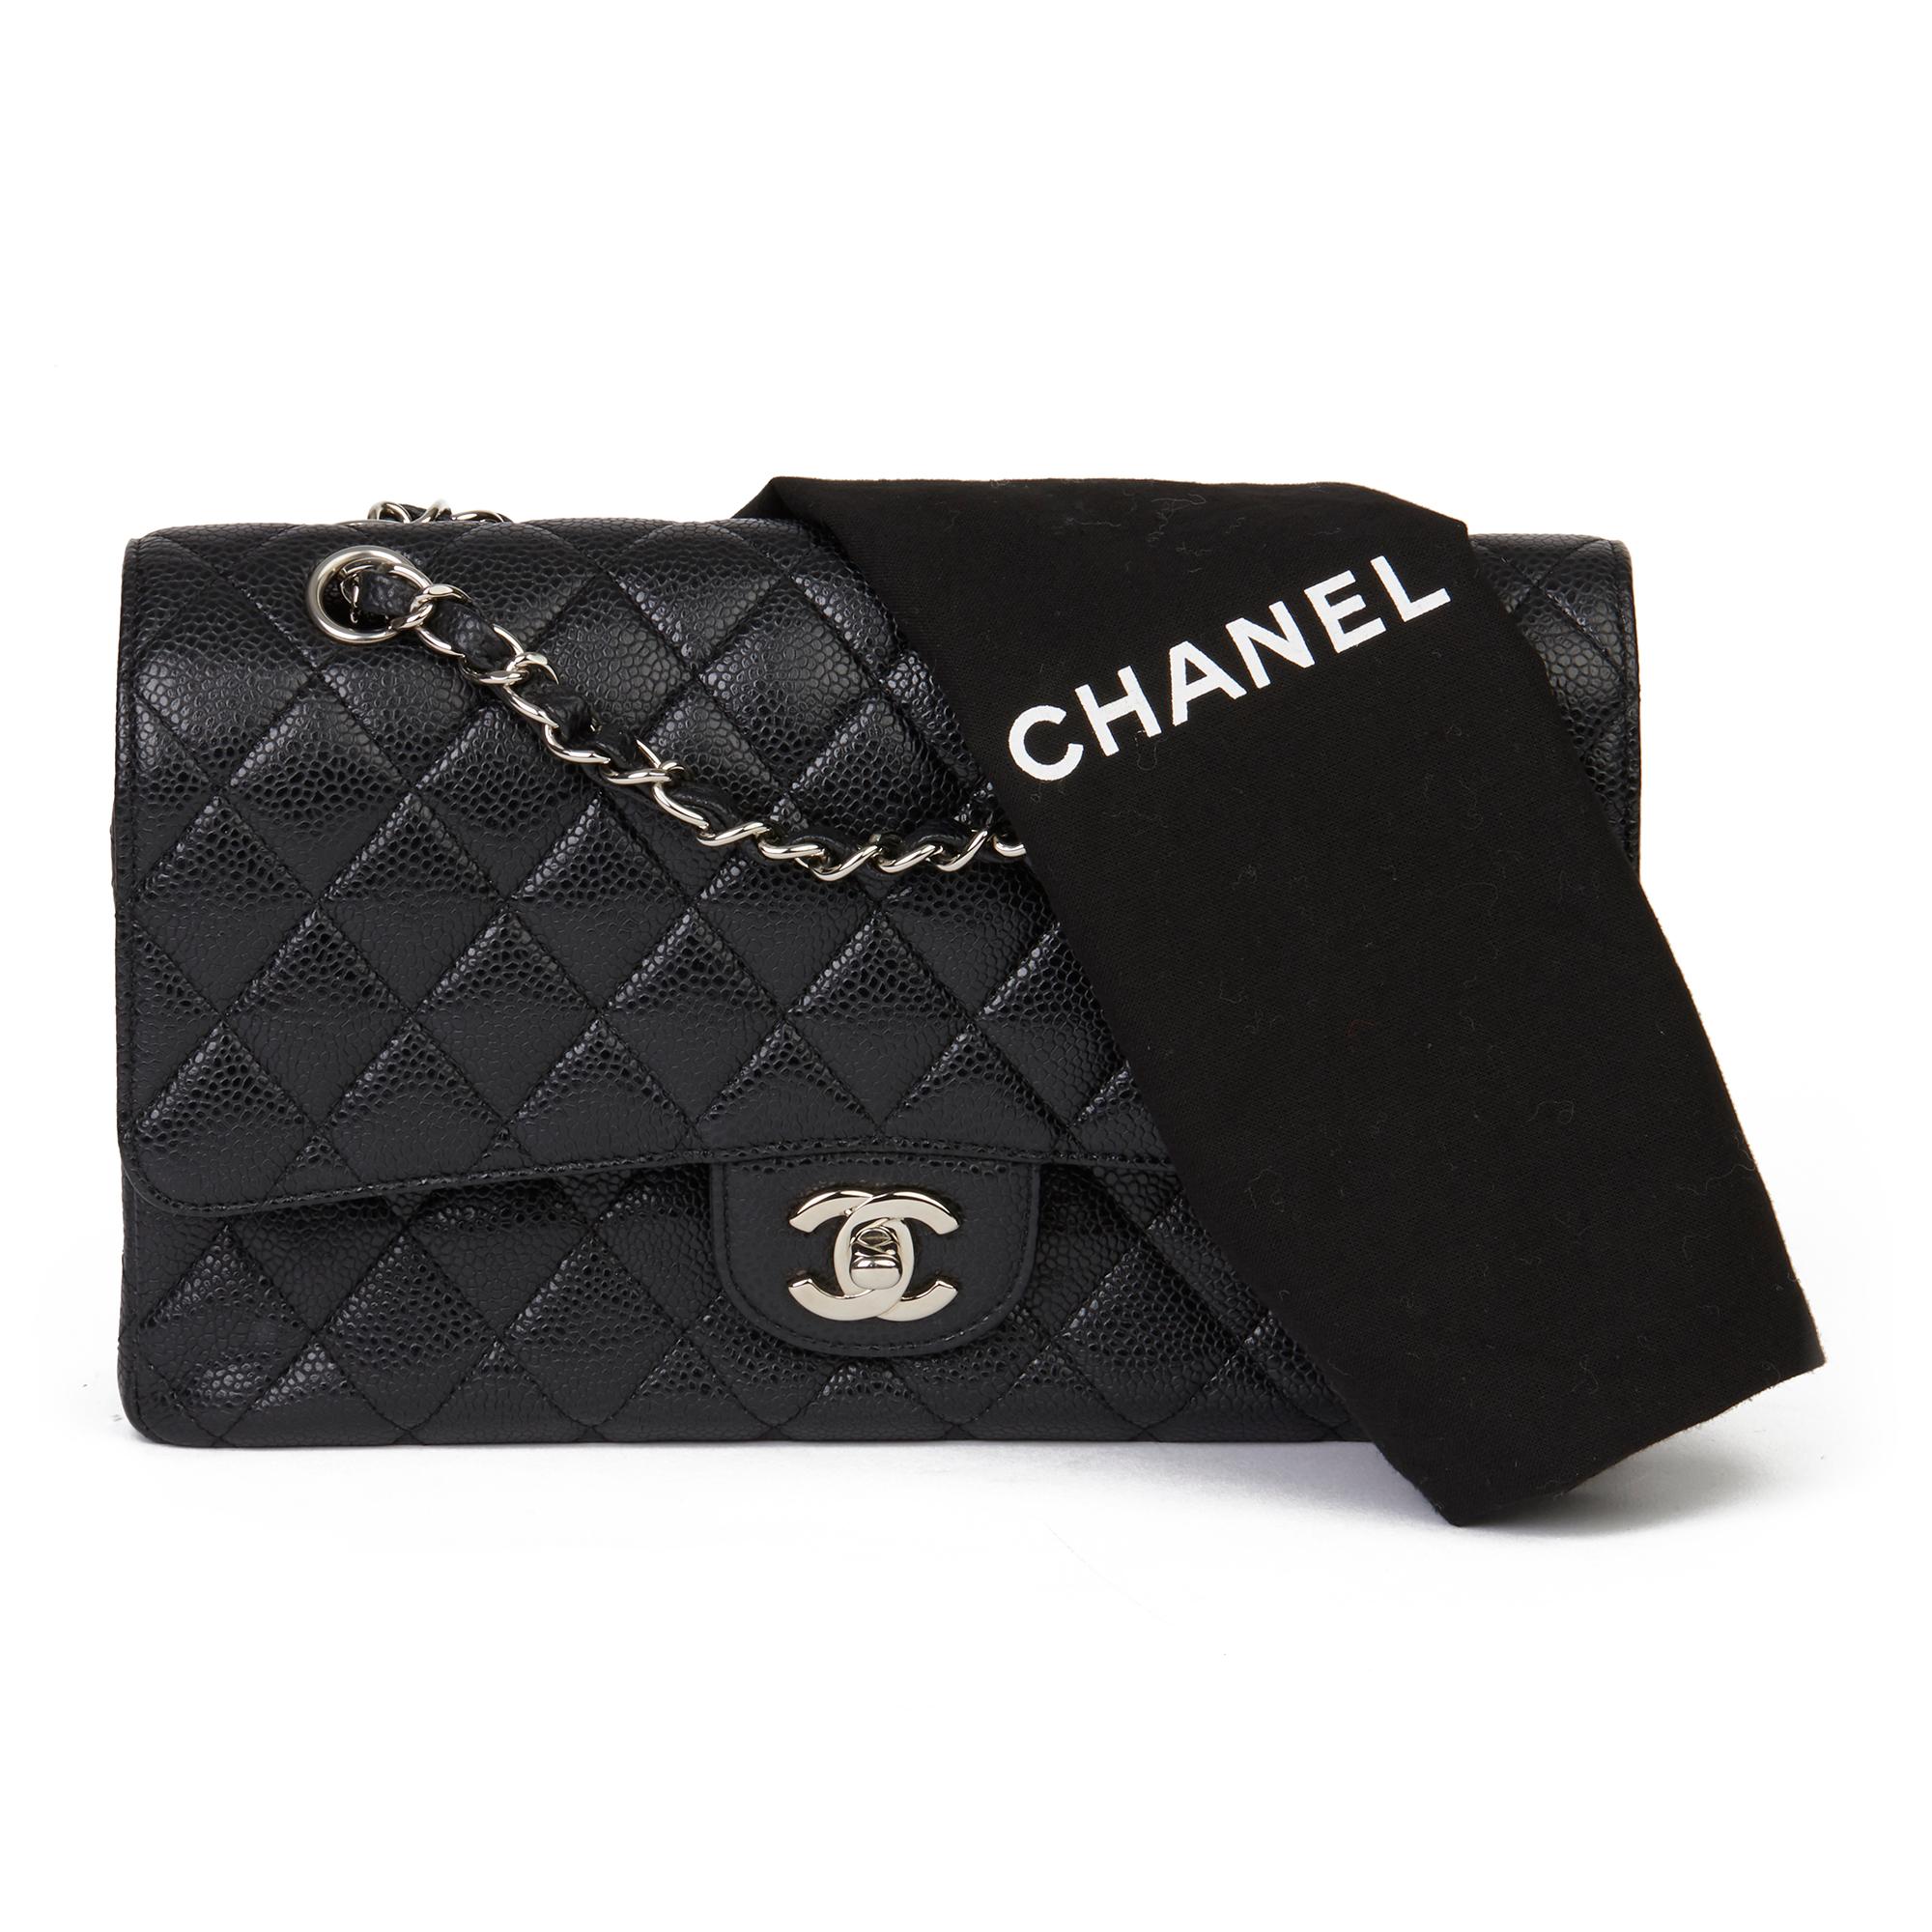 2009 Chanel Black Quilted Caviar Leather Medium Classic Double Flap Bag 4